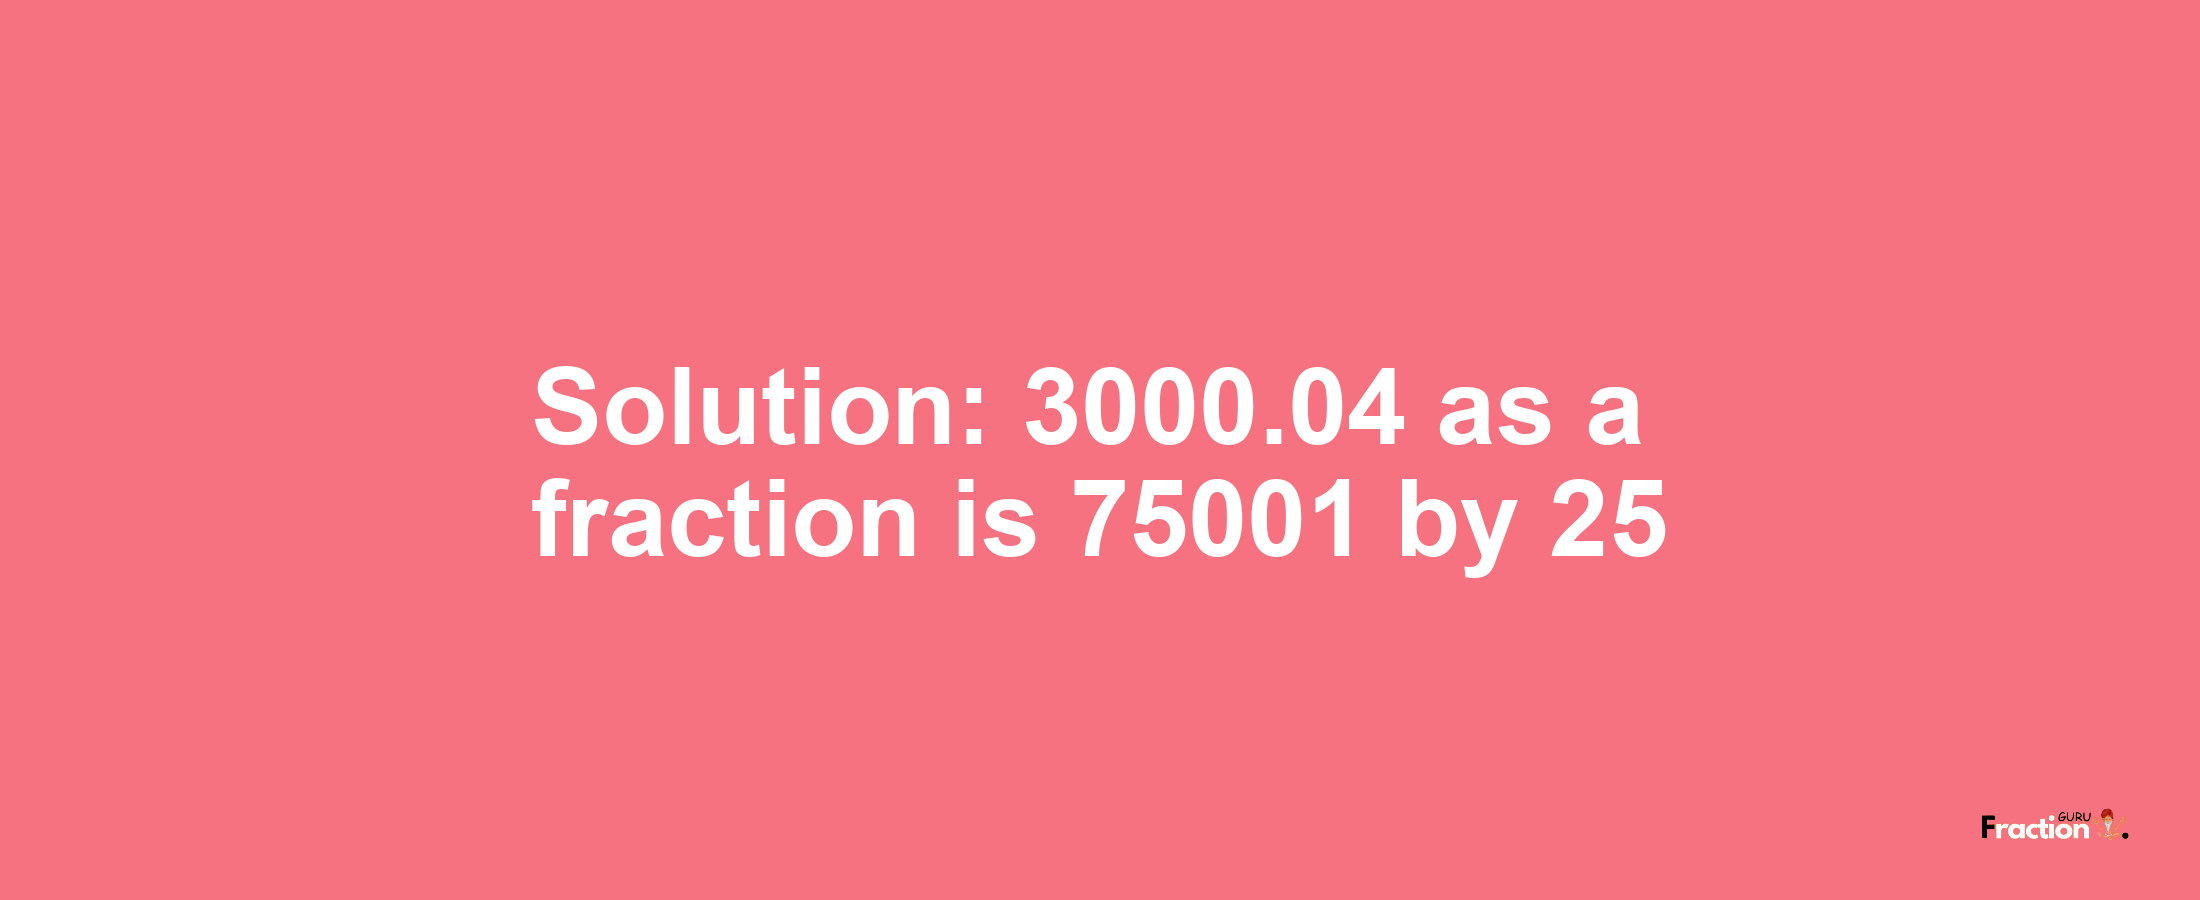 Solution:3000.04 as a fraction is 75001/25